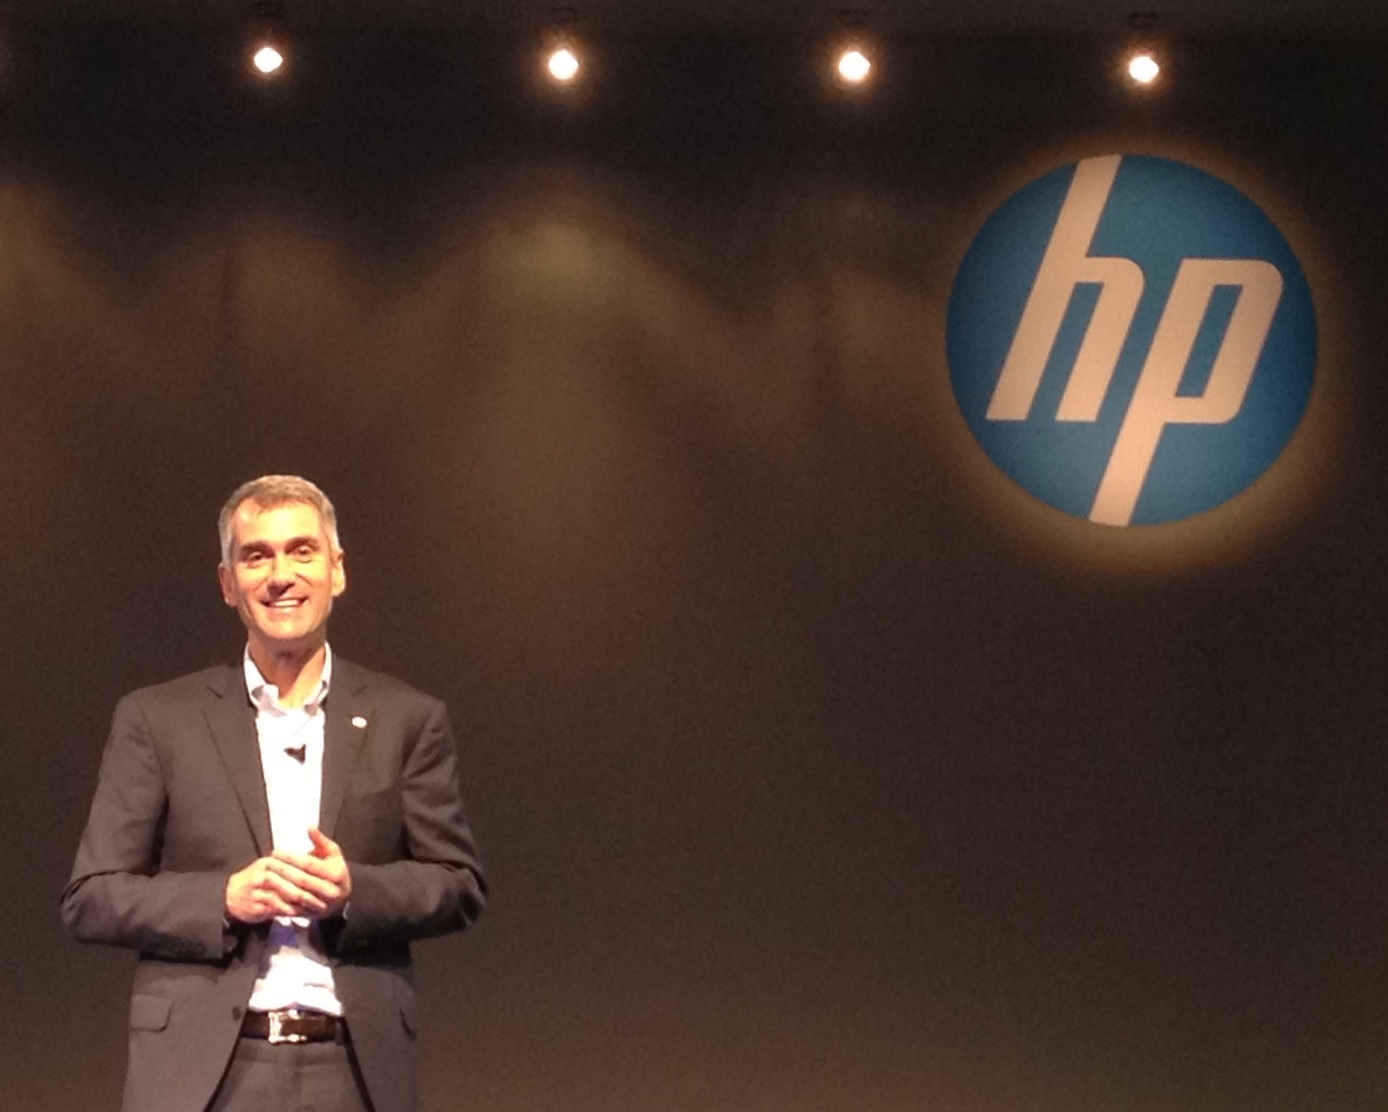 Cloud hopes fly high for HP with expanded portfolio